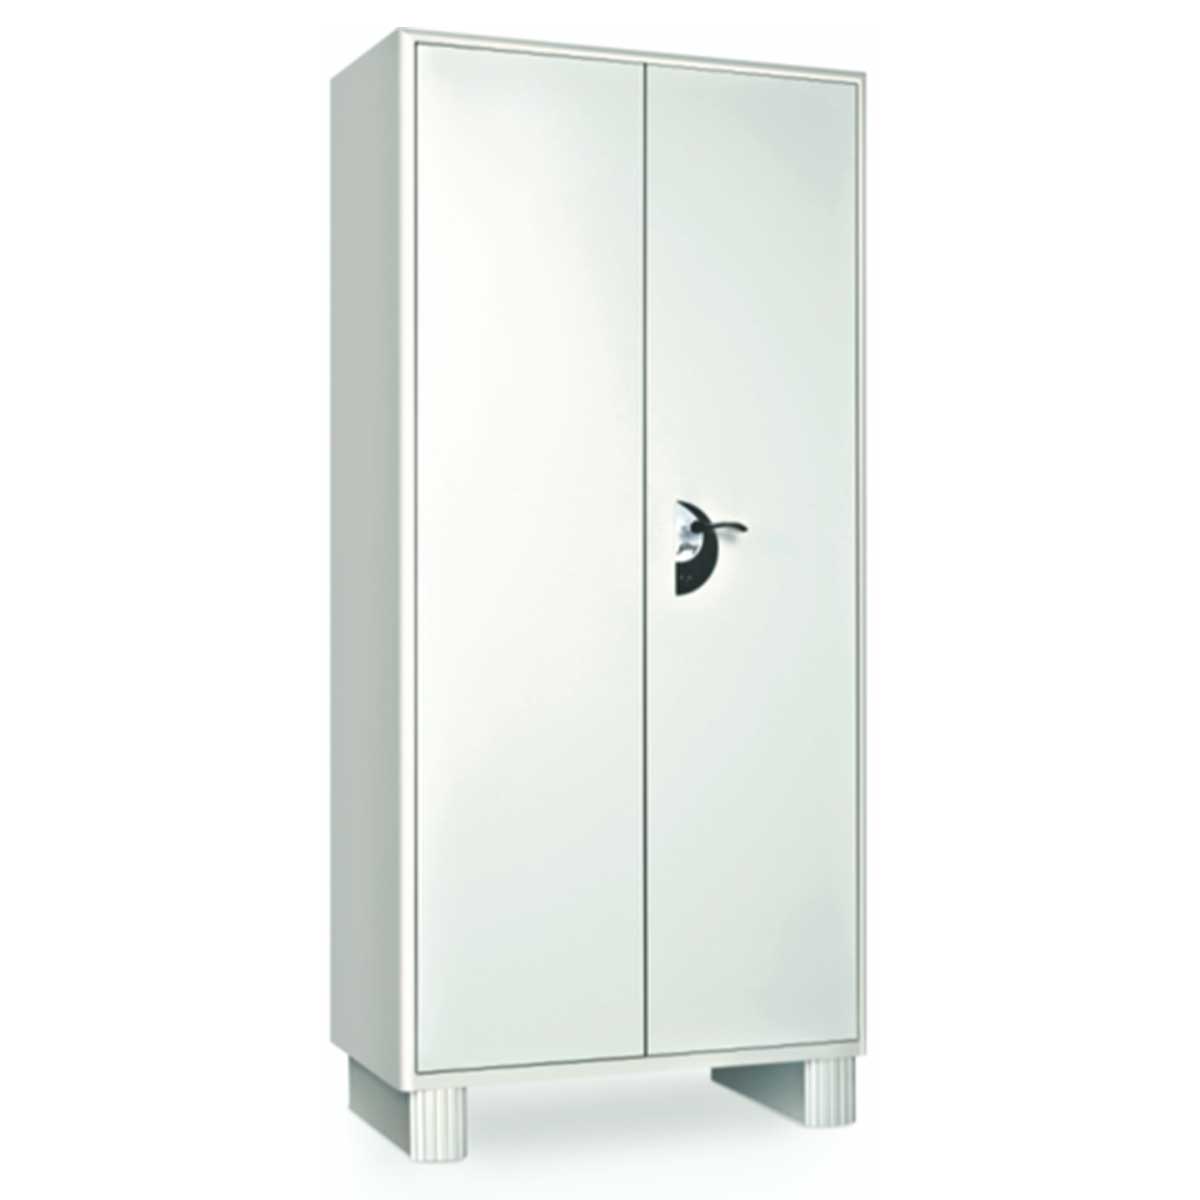 Cupboards Manufacturers, Suppliers in Rohini Sector 14